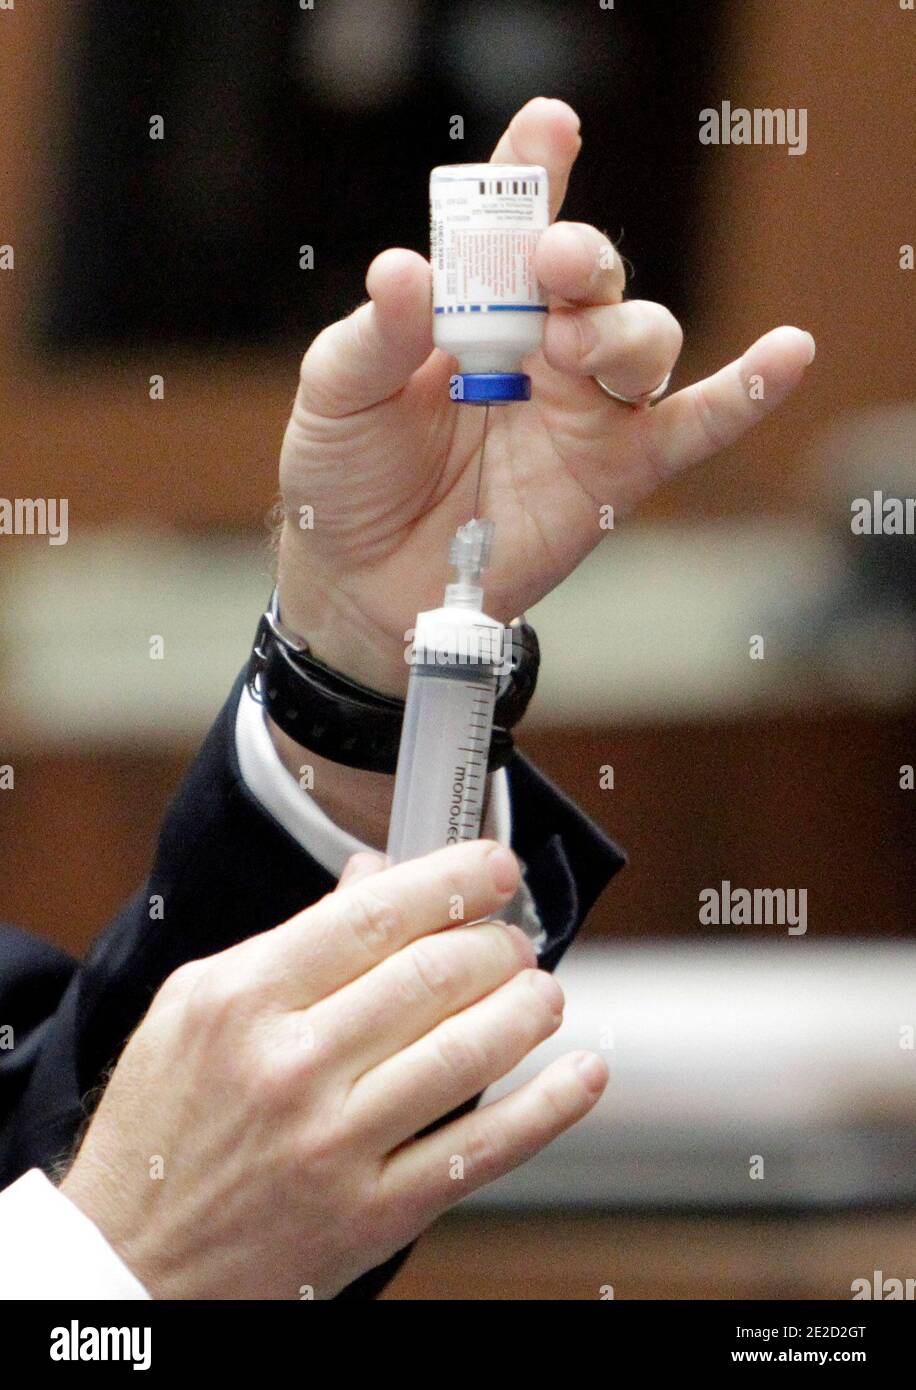 Anesthesiology expert Dr. Steven Shafer demonstrates the use of propofol while testifying during Dr. Conrad Murray's involuntary manslaughter trial in Los Angeles on October 20, 2011. Murray has pleaded not guilty and faces four years in prison and the loss of his medical license if convicted of involuntary manslaughter in Michael Jackson's death. Photo by Reed Saxon/Pool/ABACAPRESS.COM Stock Photo